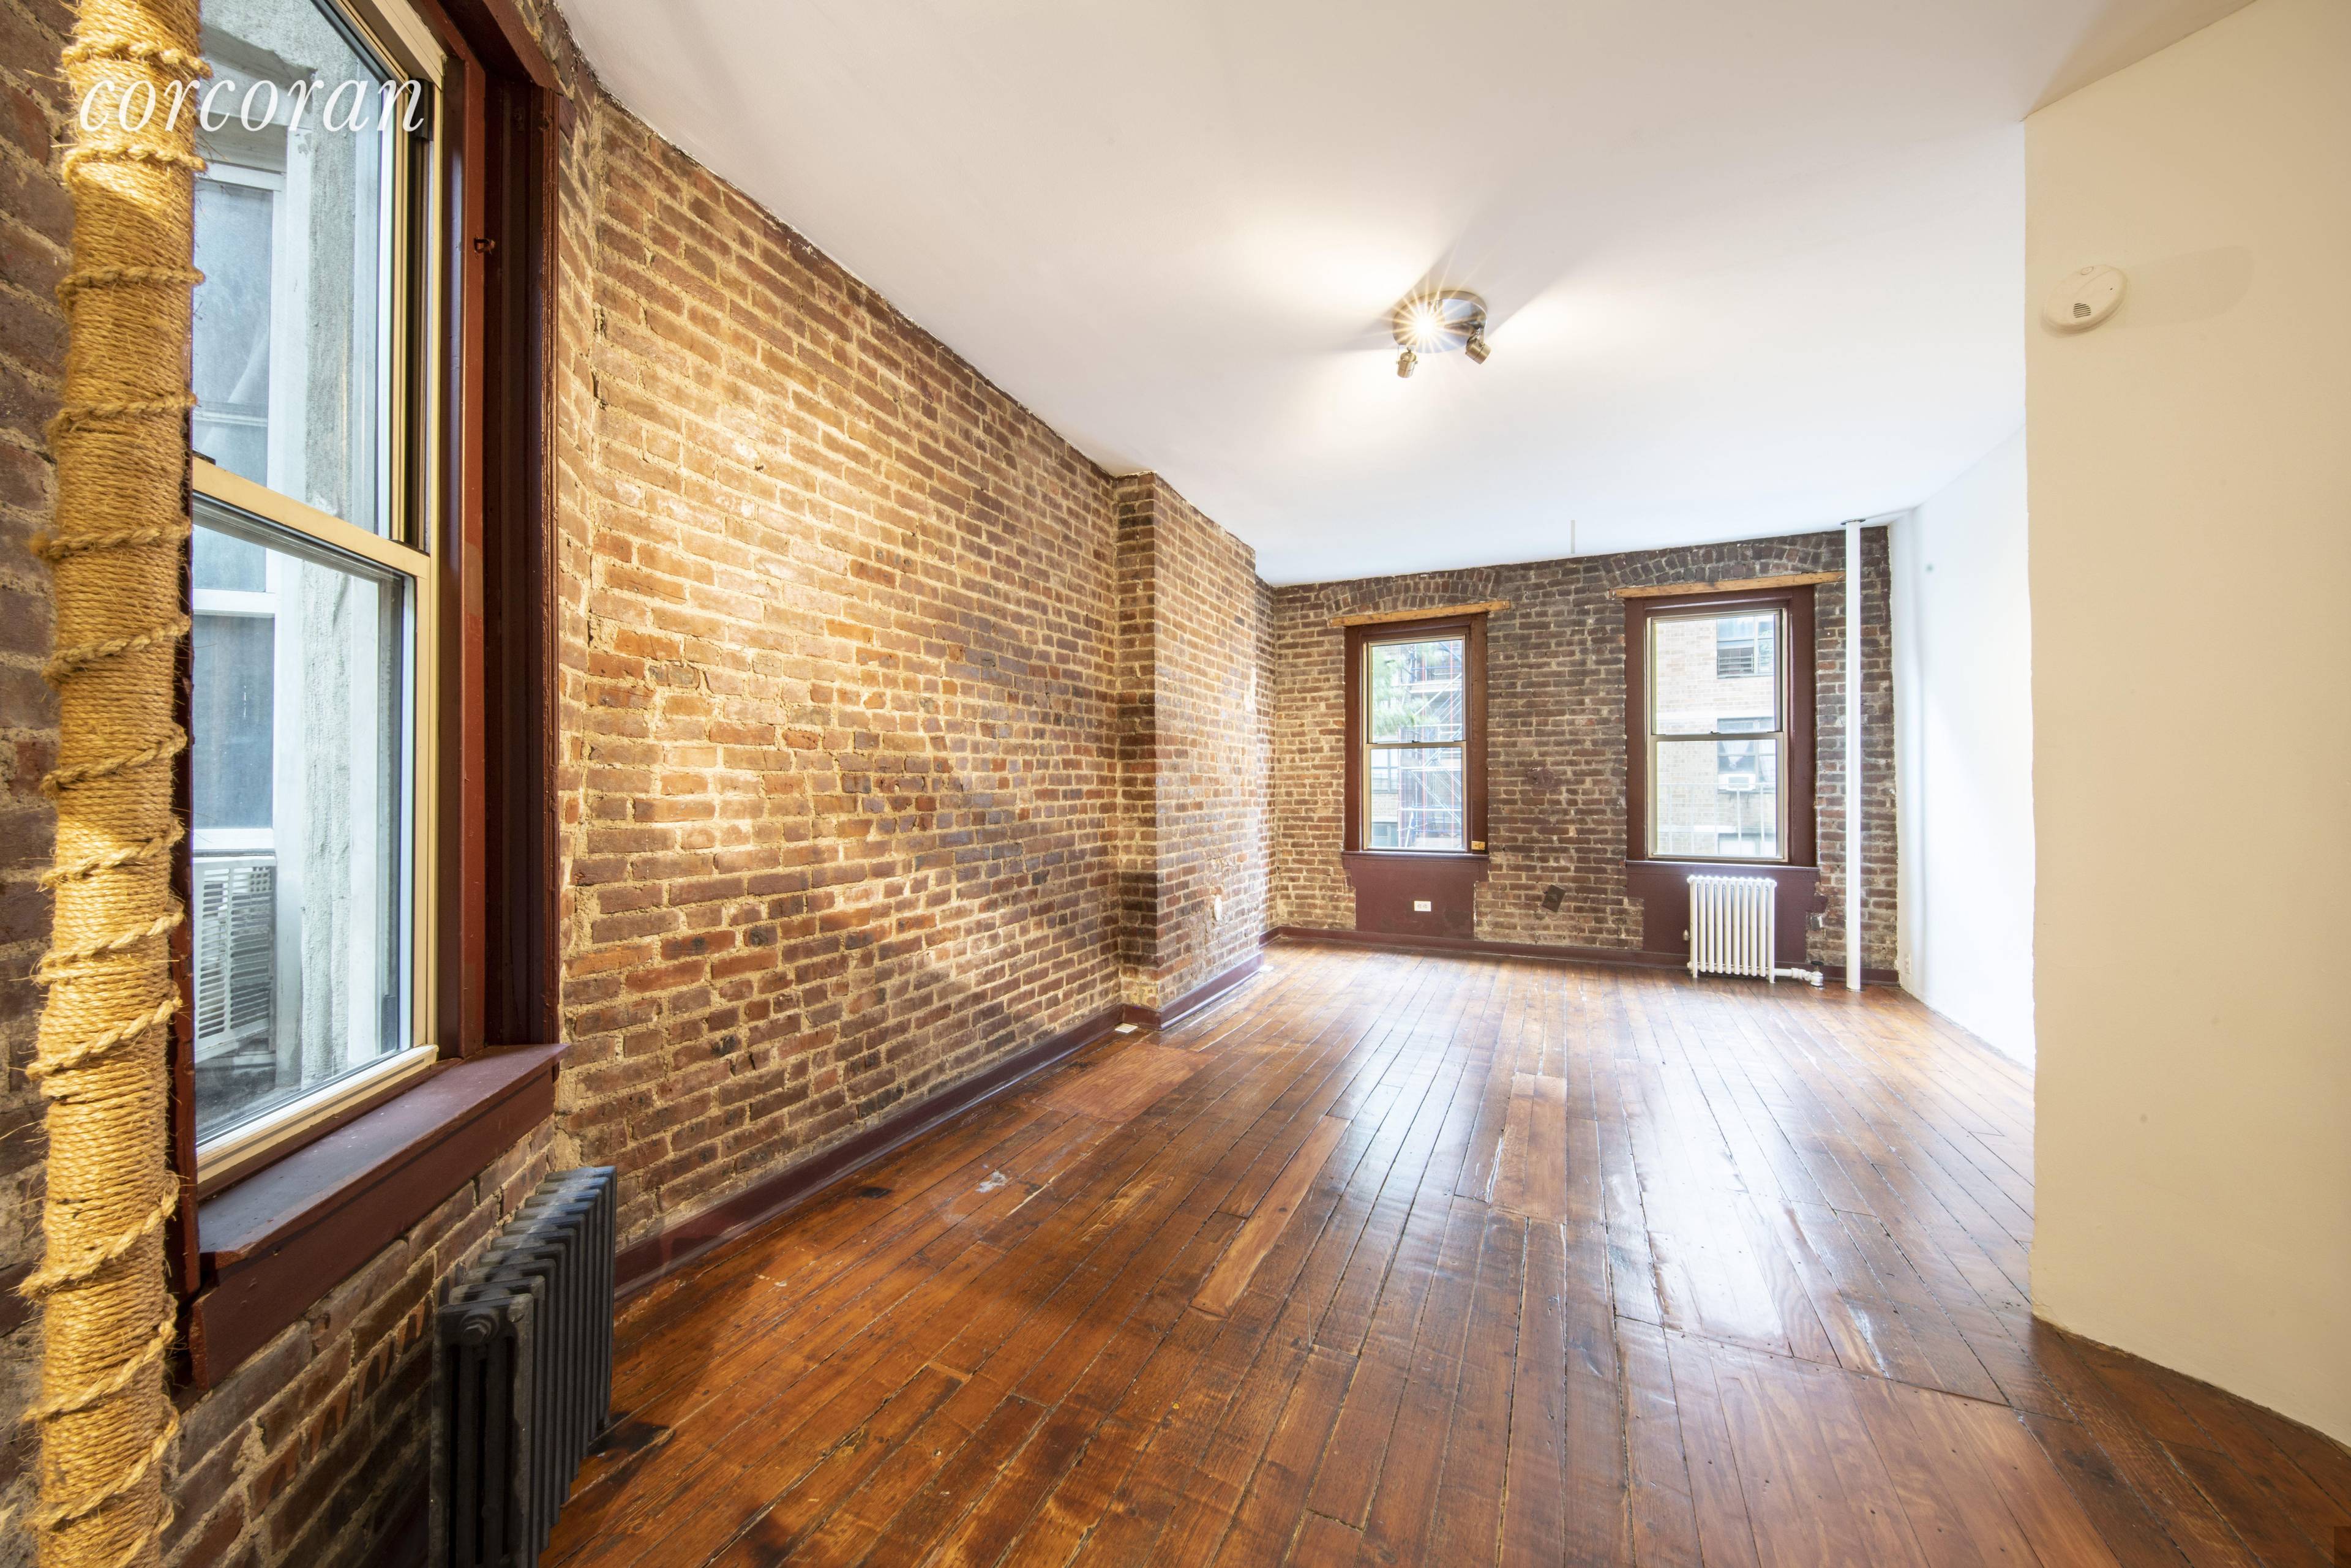 Welcome to 630 East 14th Street, a low rise Pre War co op located in the East Village, between Avenues B and C.